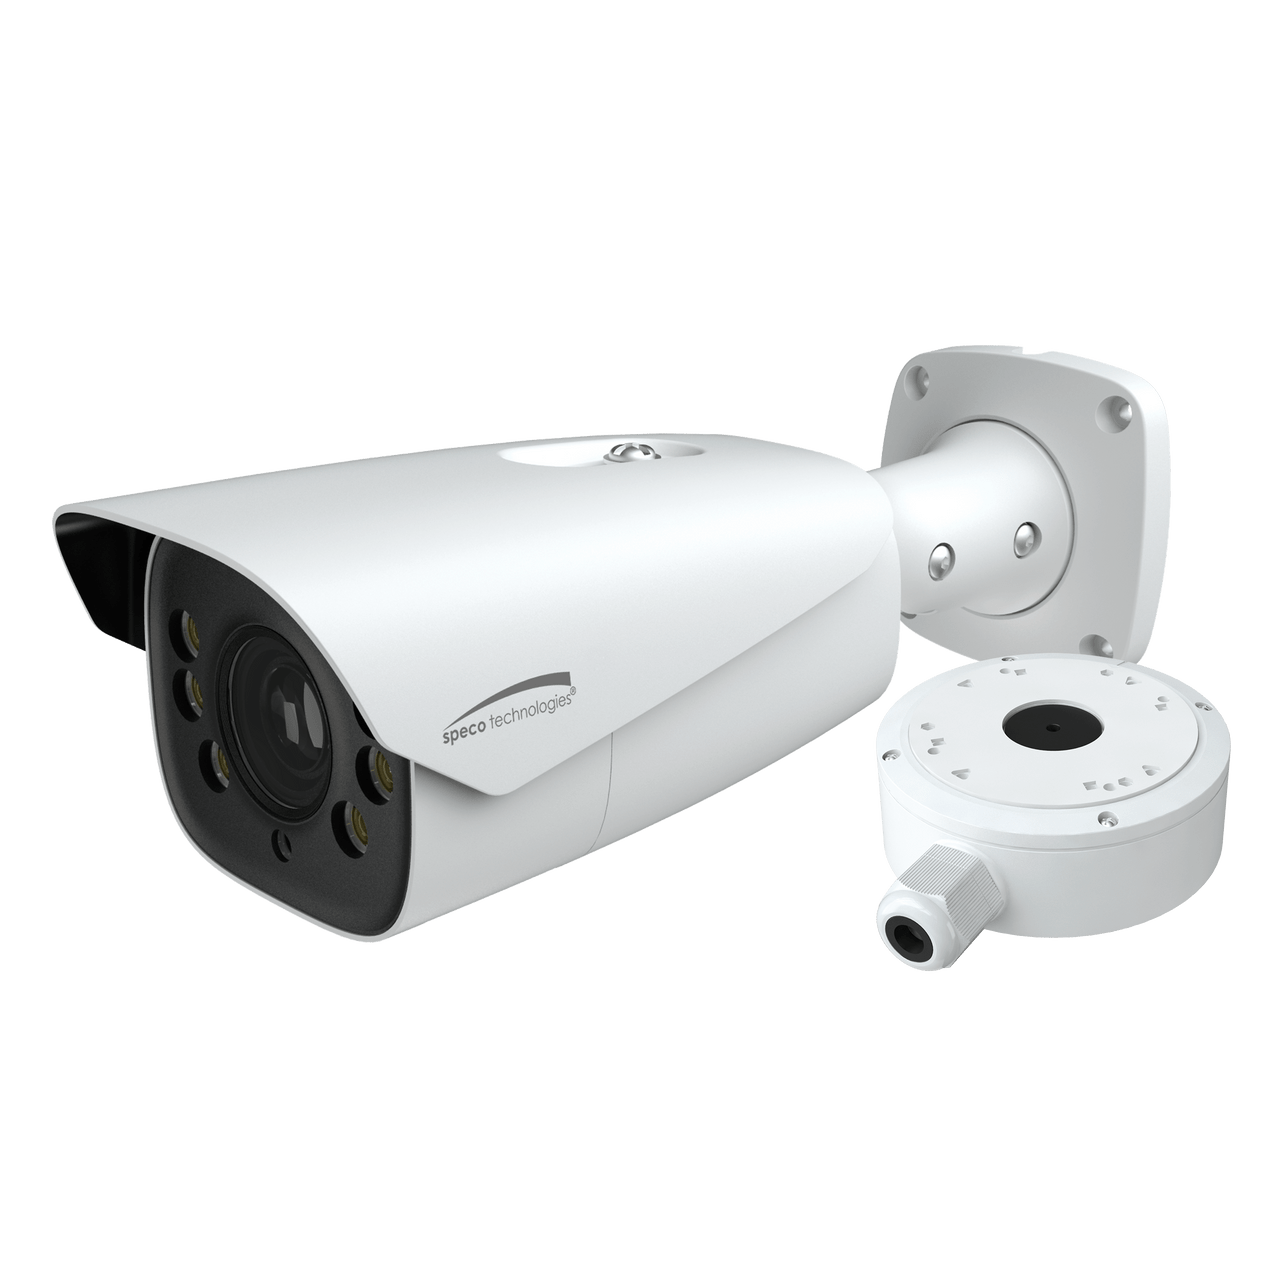 Speco Technologies SPE-O2BFRM 2MP IP Bullet Camera with Facial Recognition, 7-22 mm motorized lens, Included J (SPE-O2BFRM)